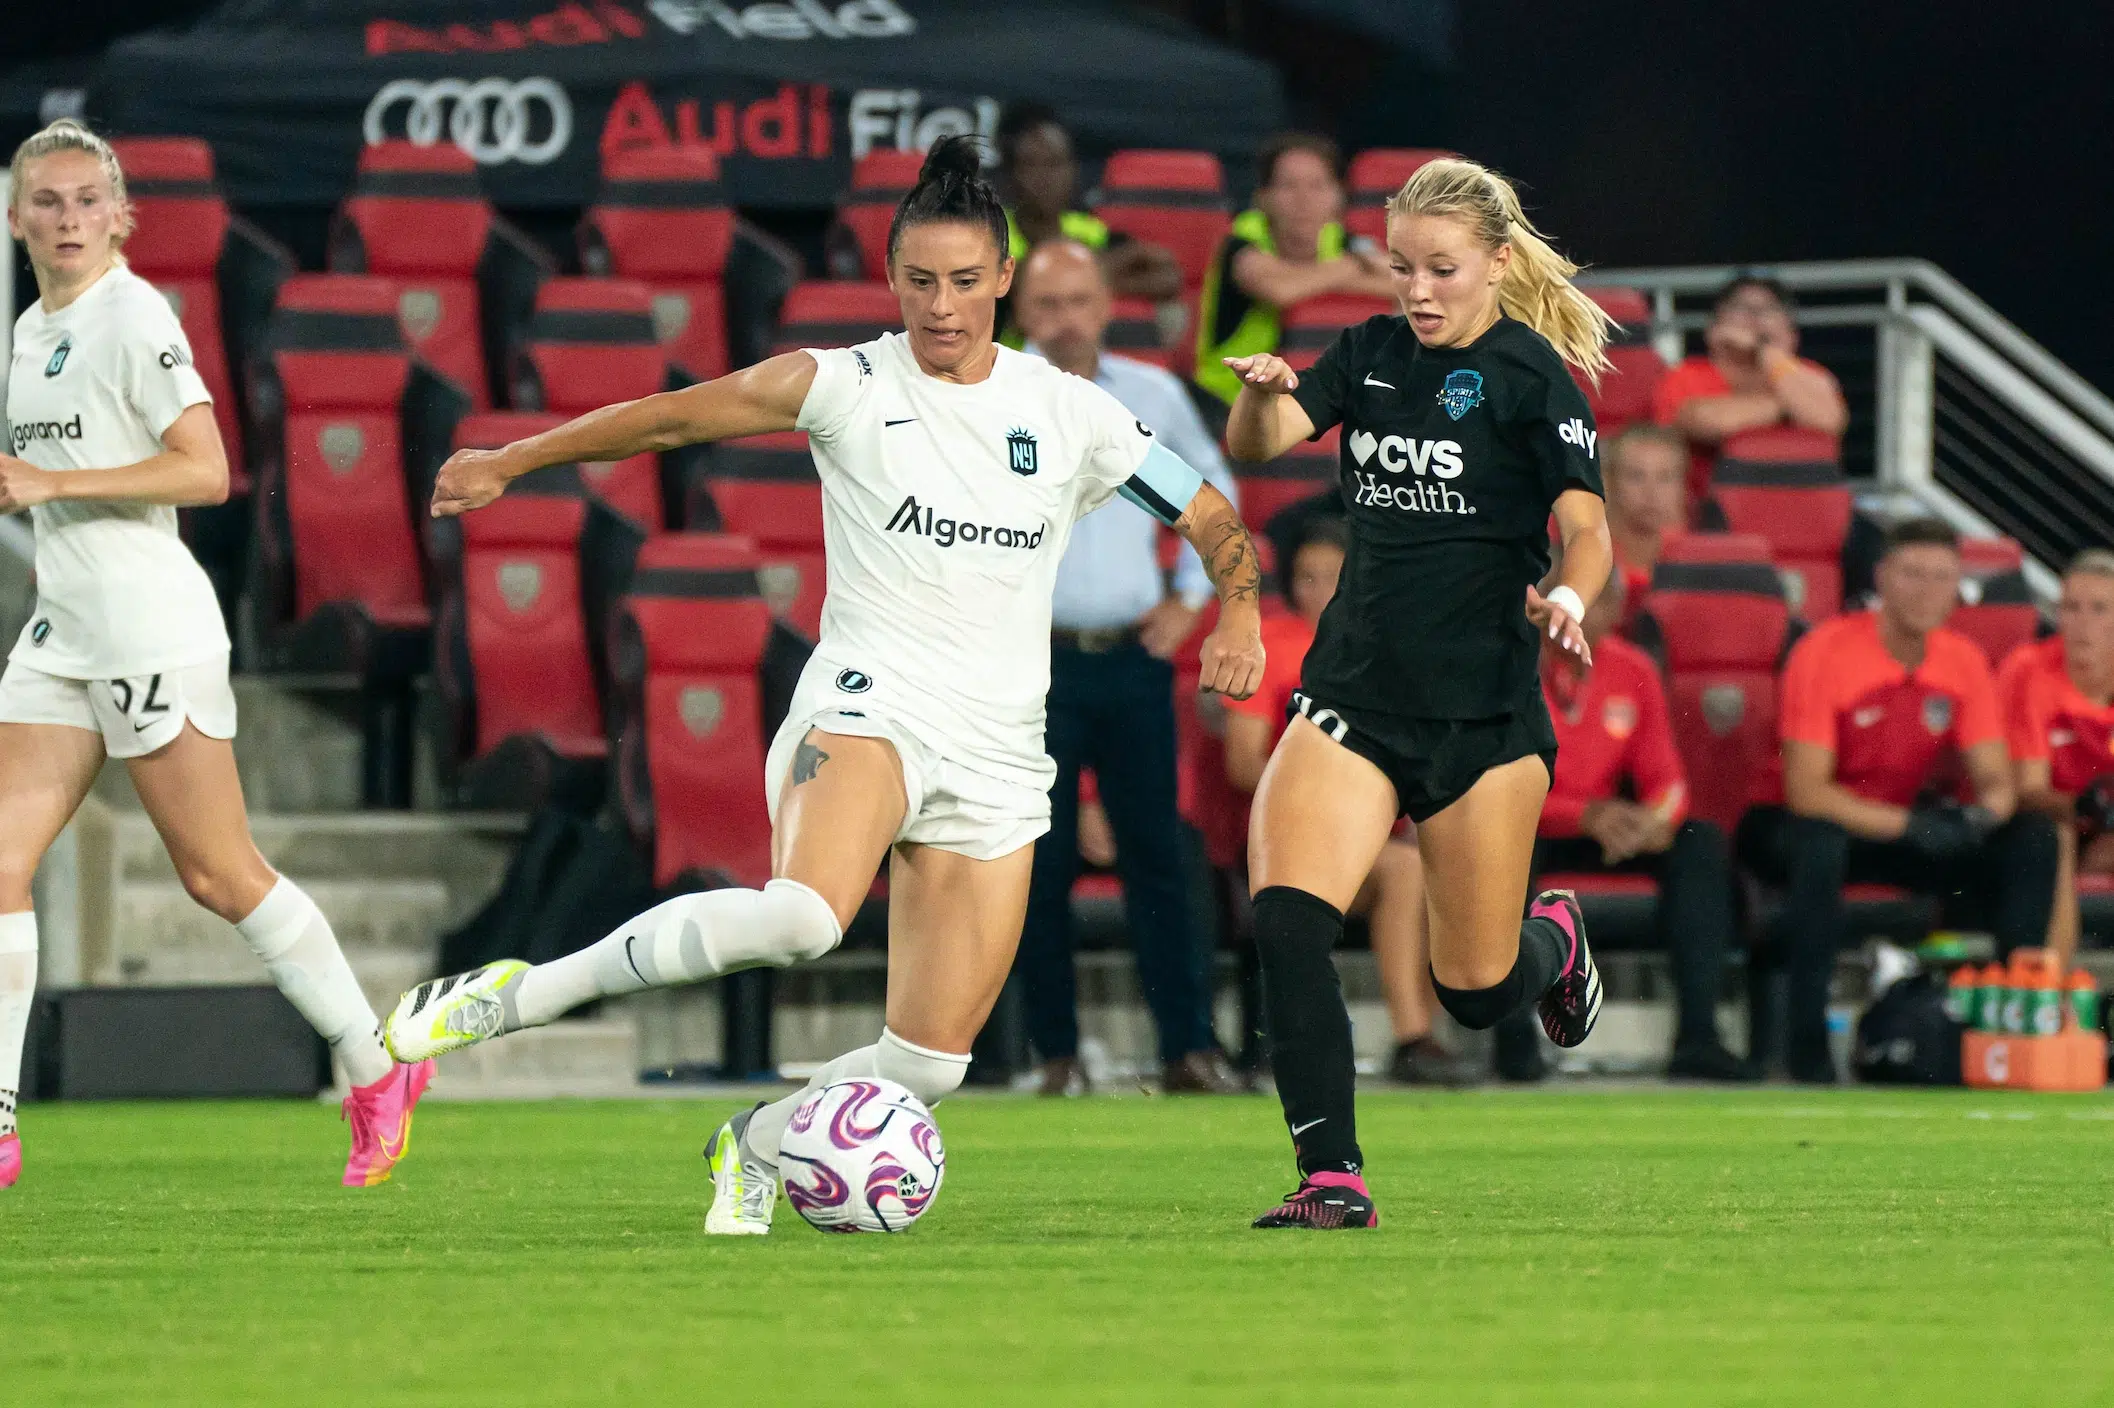 Chloe Ricketts in a black uniform defends Ali Krieger in a white uniform who dribbles a soccer ball.